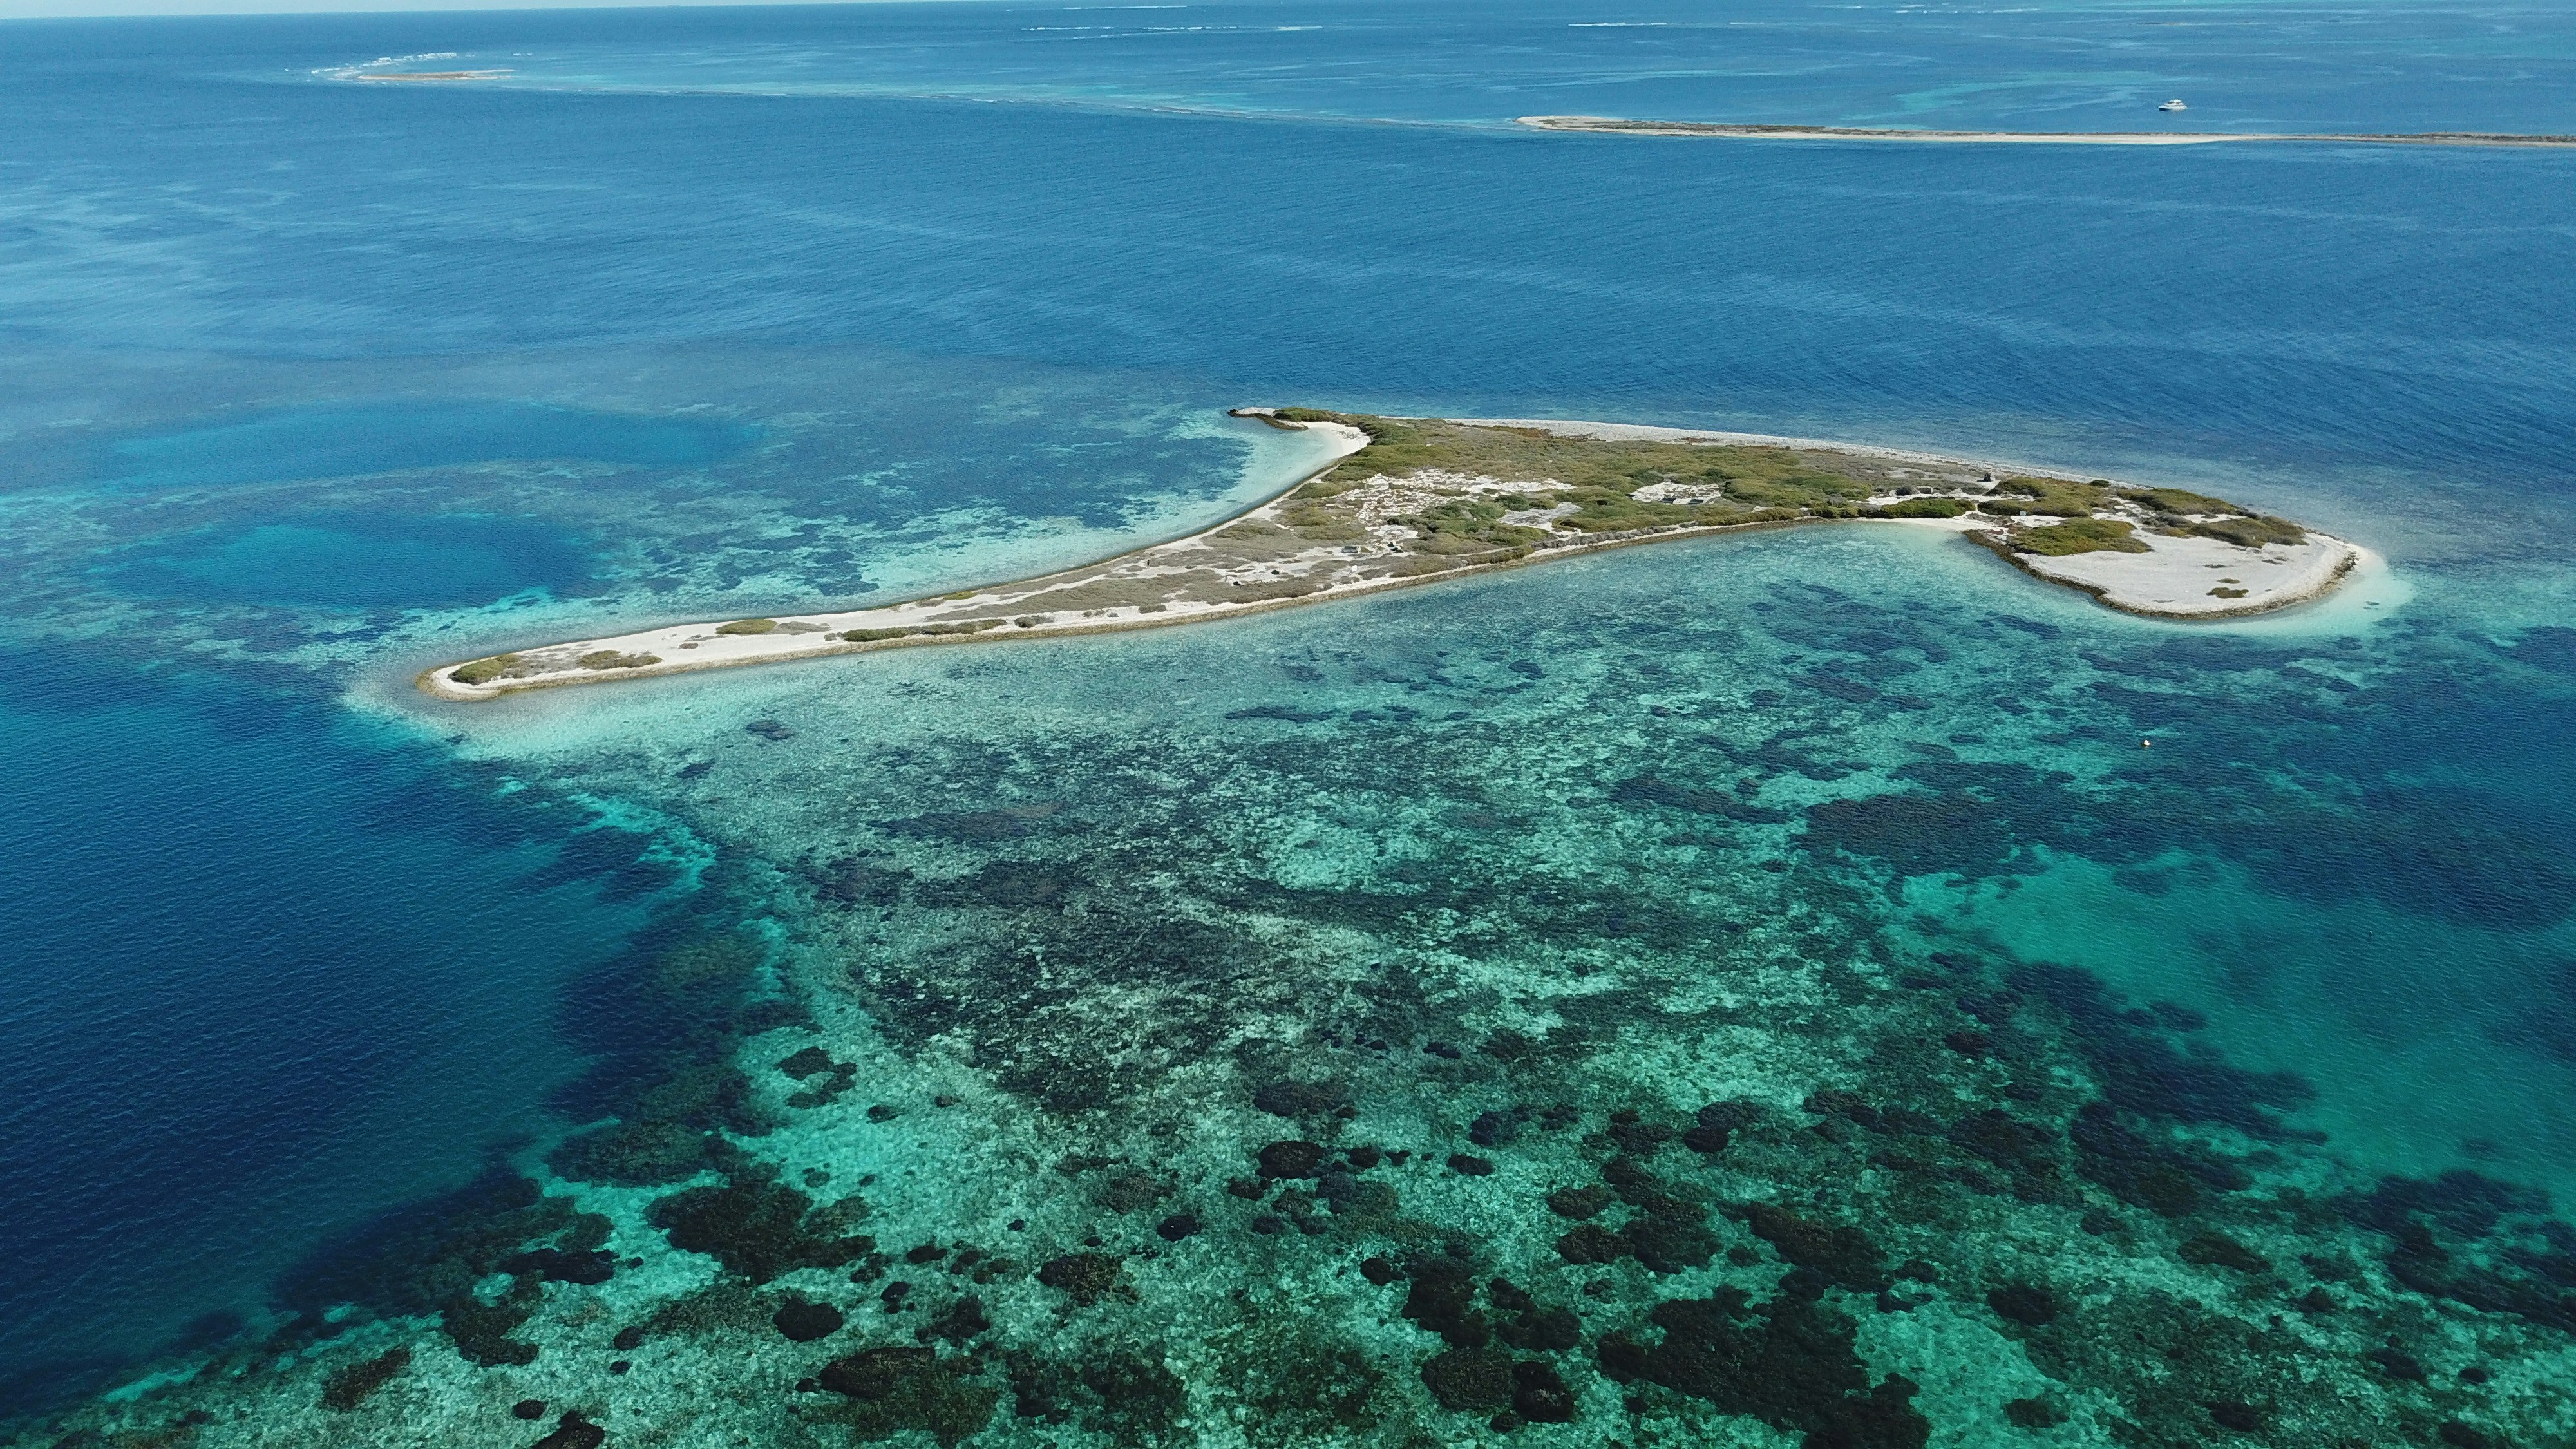 The Houtman Abrolhos Islands National Park 